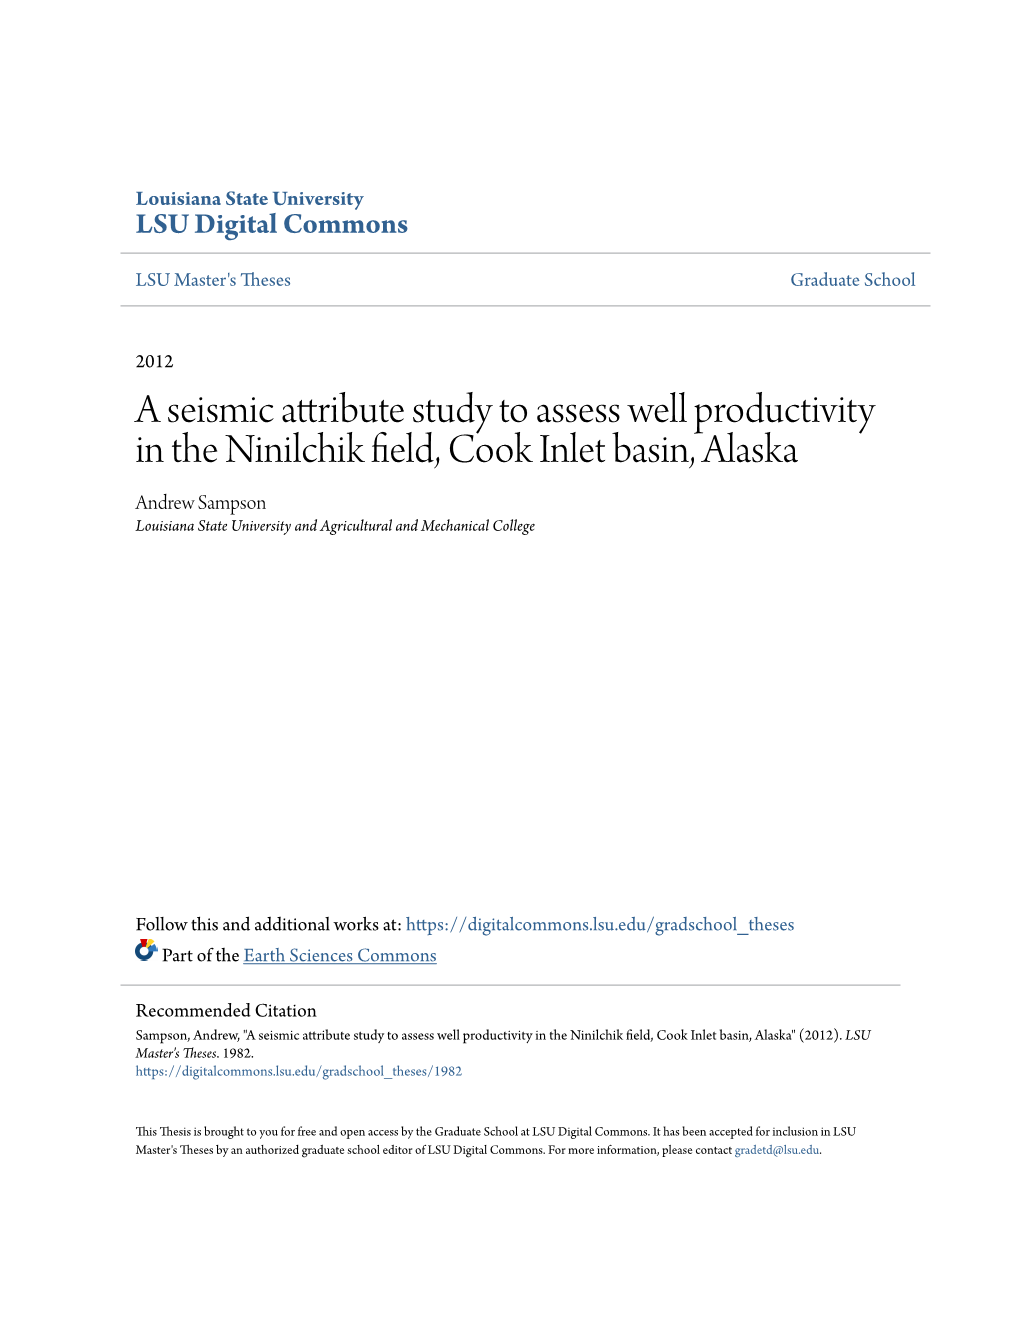 A Seismic Attribute Study to Assess Well Productivity in the Ninilchik Field, Cook Inlet Basin, Alaska